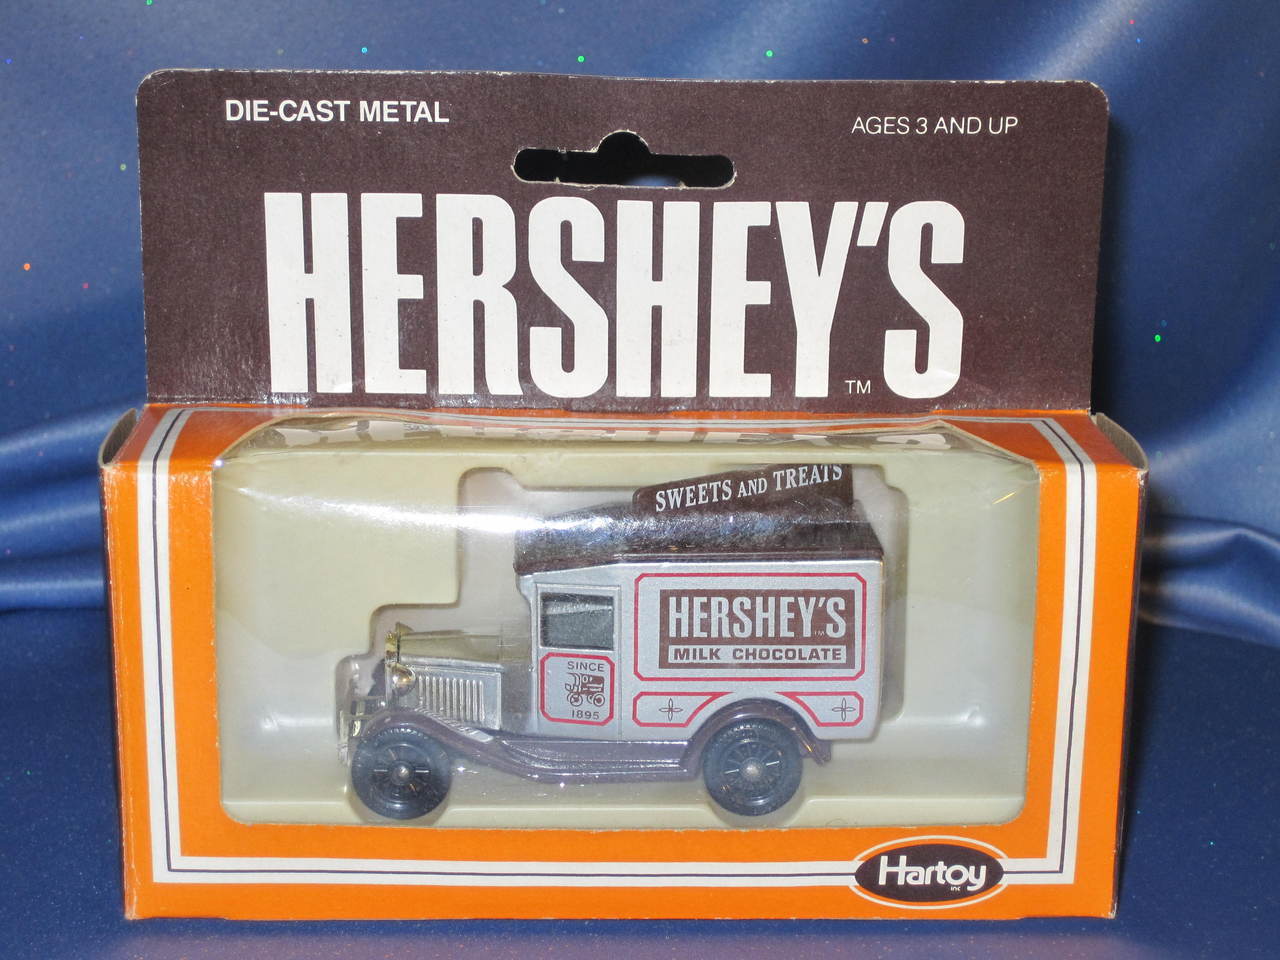 Primary image for Hershey's Milk Chocolate Sweets and Treats Delivery Truck by Lledo.